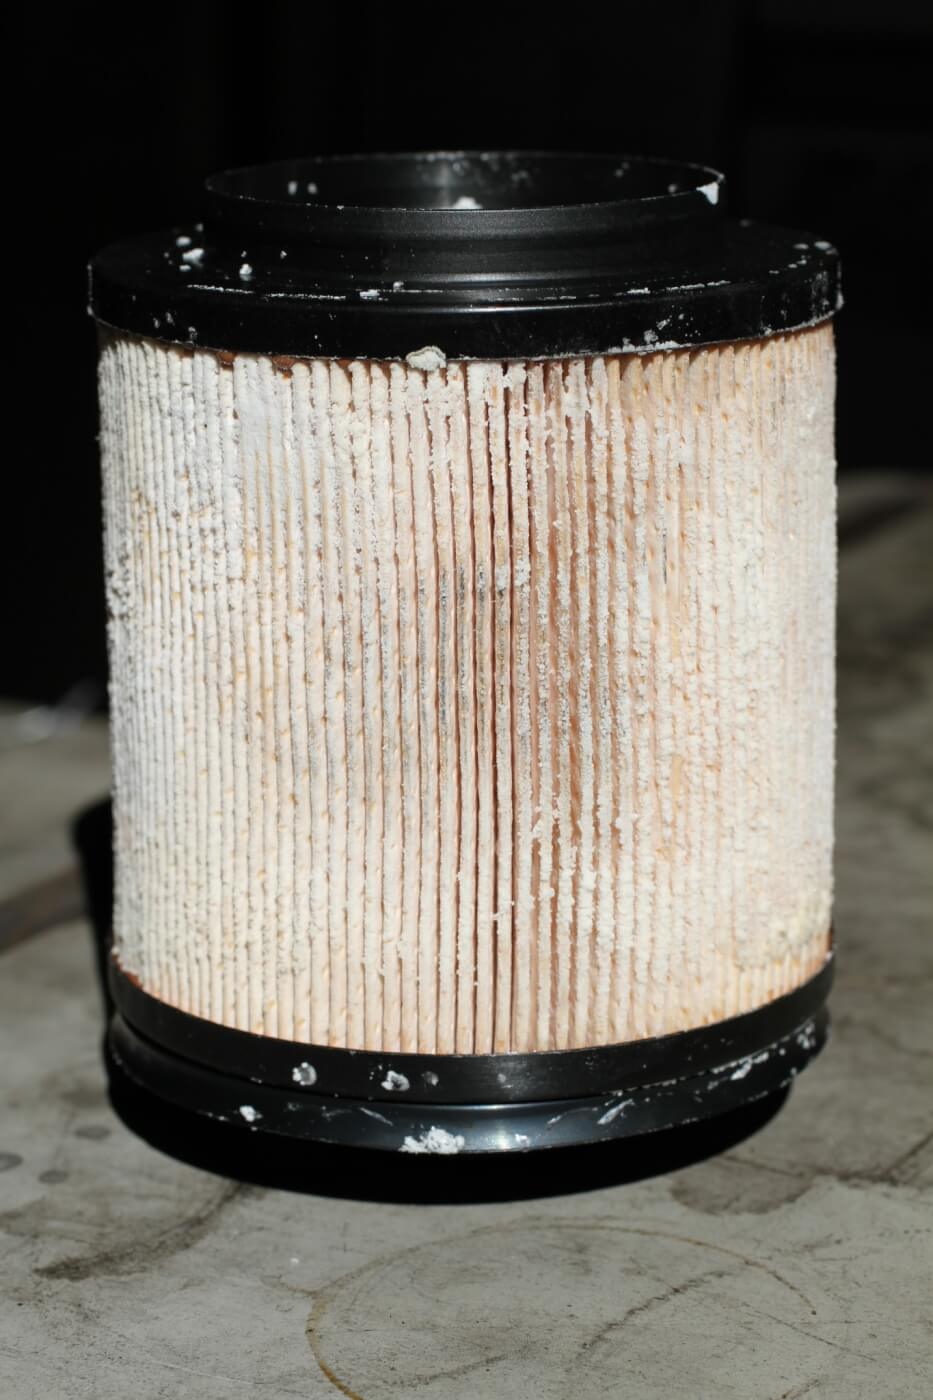 10. Here you see a fuel filter that’s encrusted with urea crystals from DEF. This is a sure sign of DEF contamination in the fuel. 